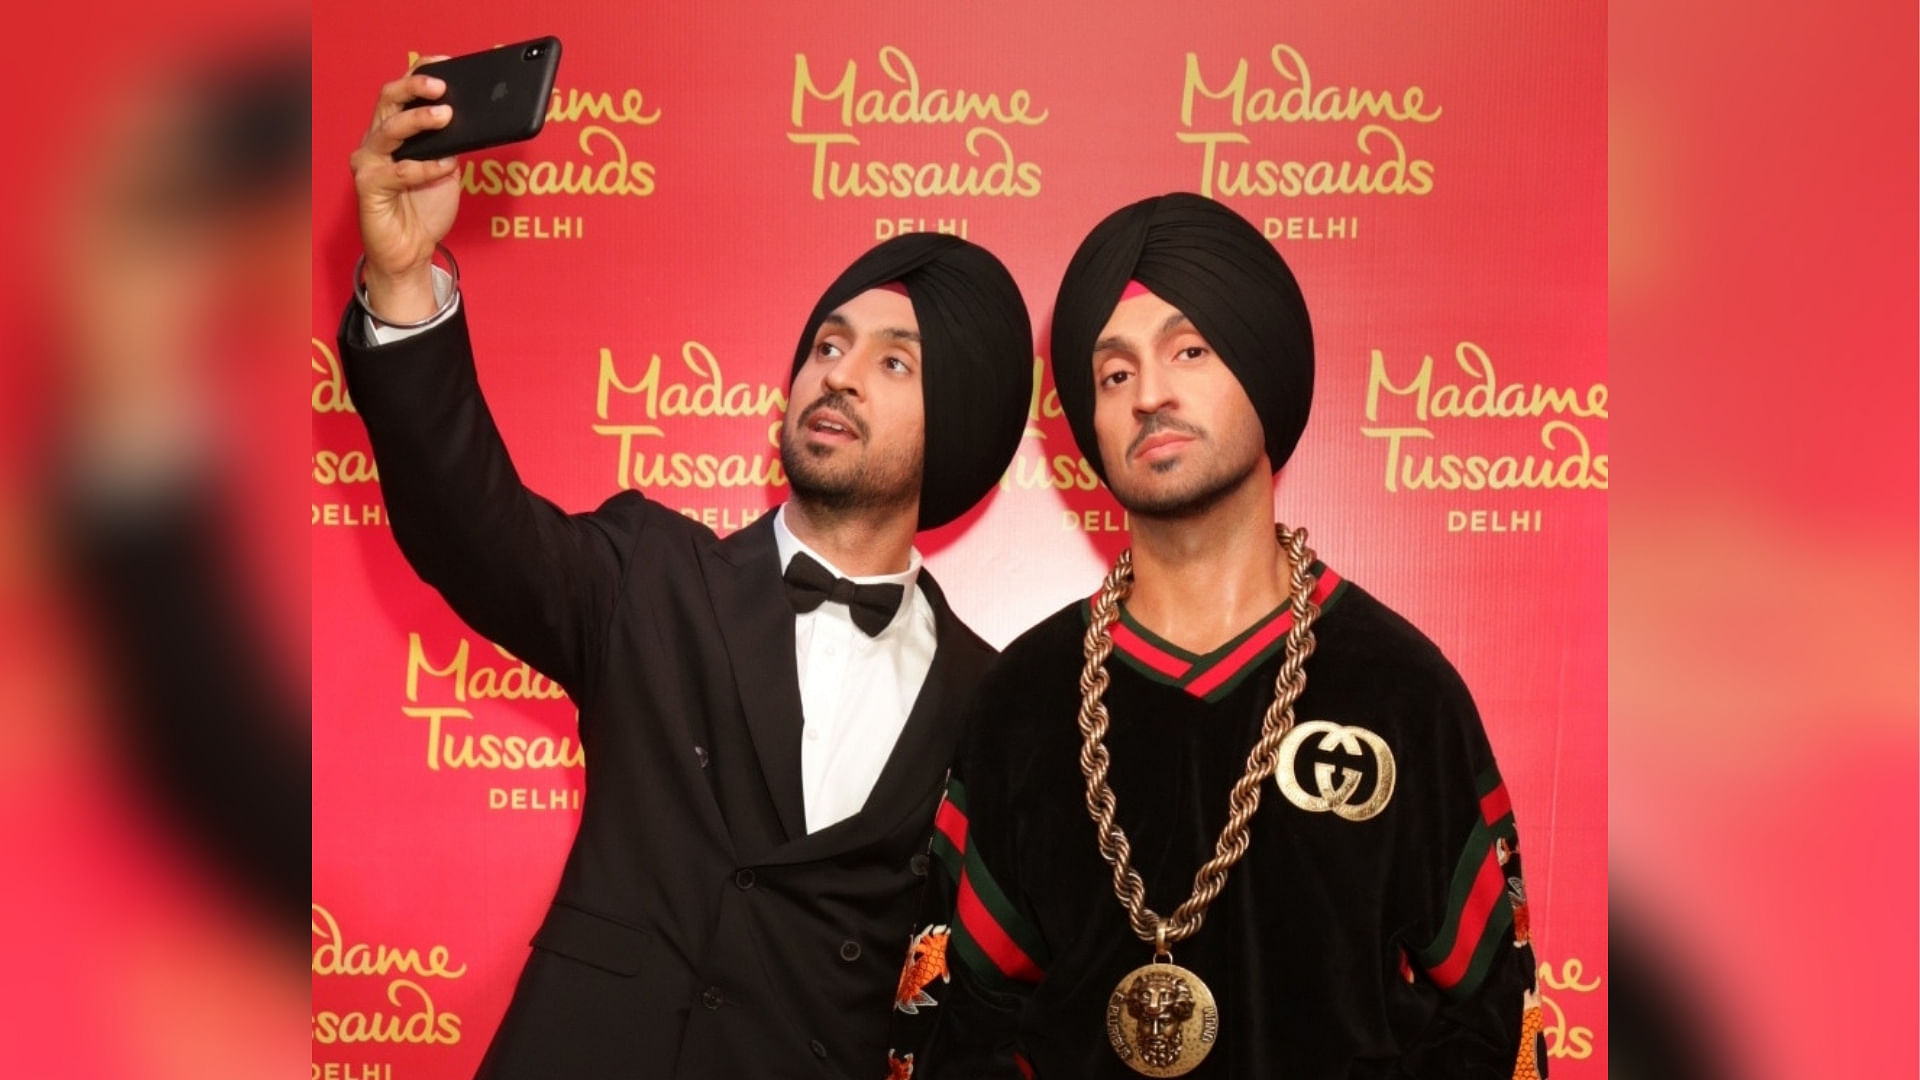 Diljit Dosanjh takes a selfie with his wax figure at Madame Tussauds in Delhi.